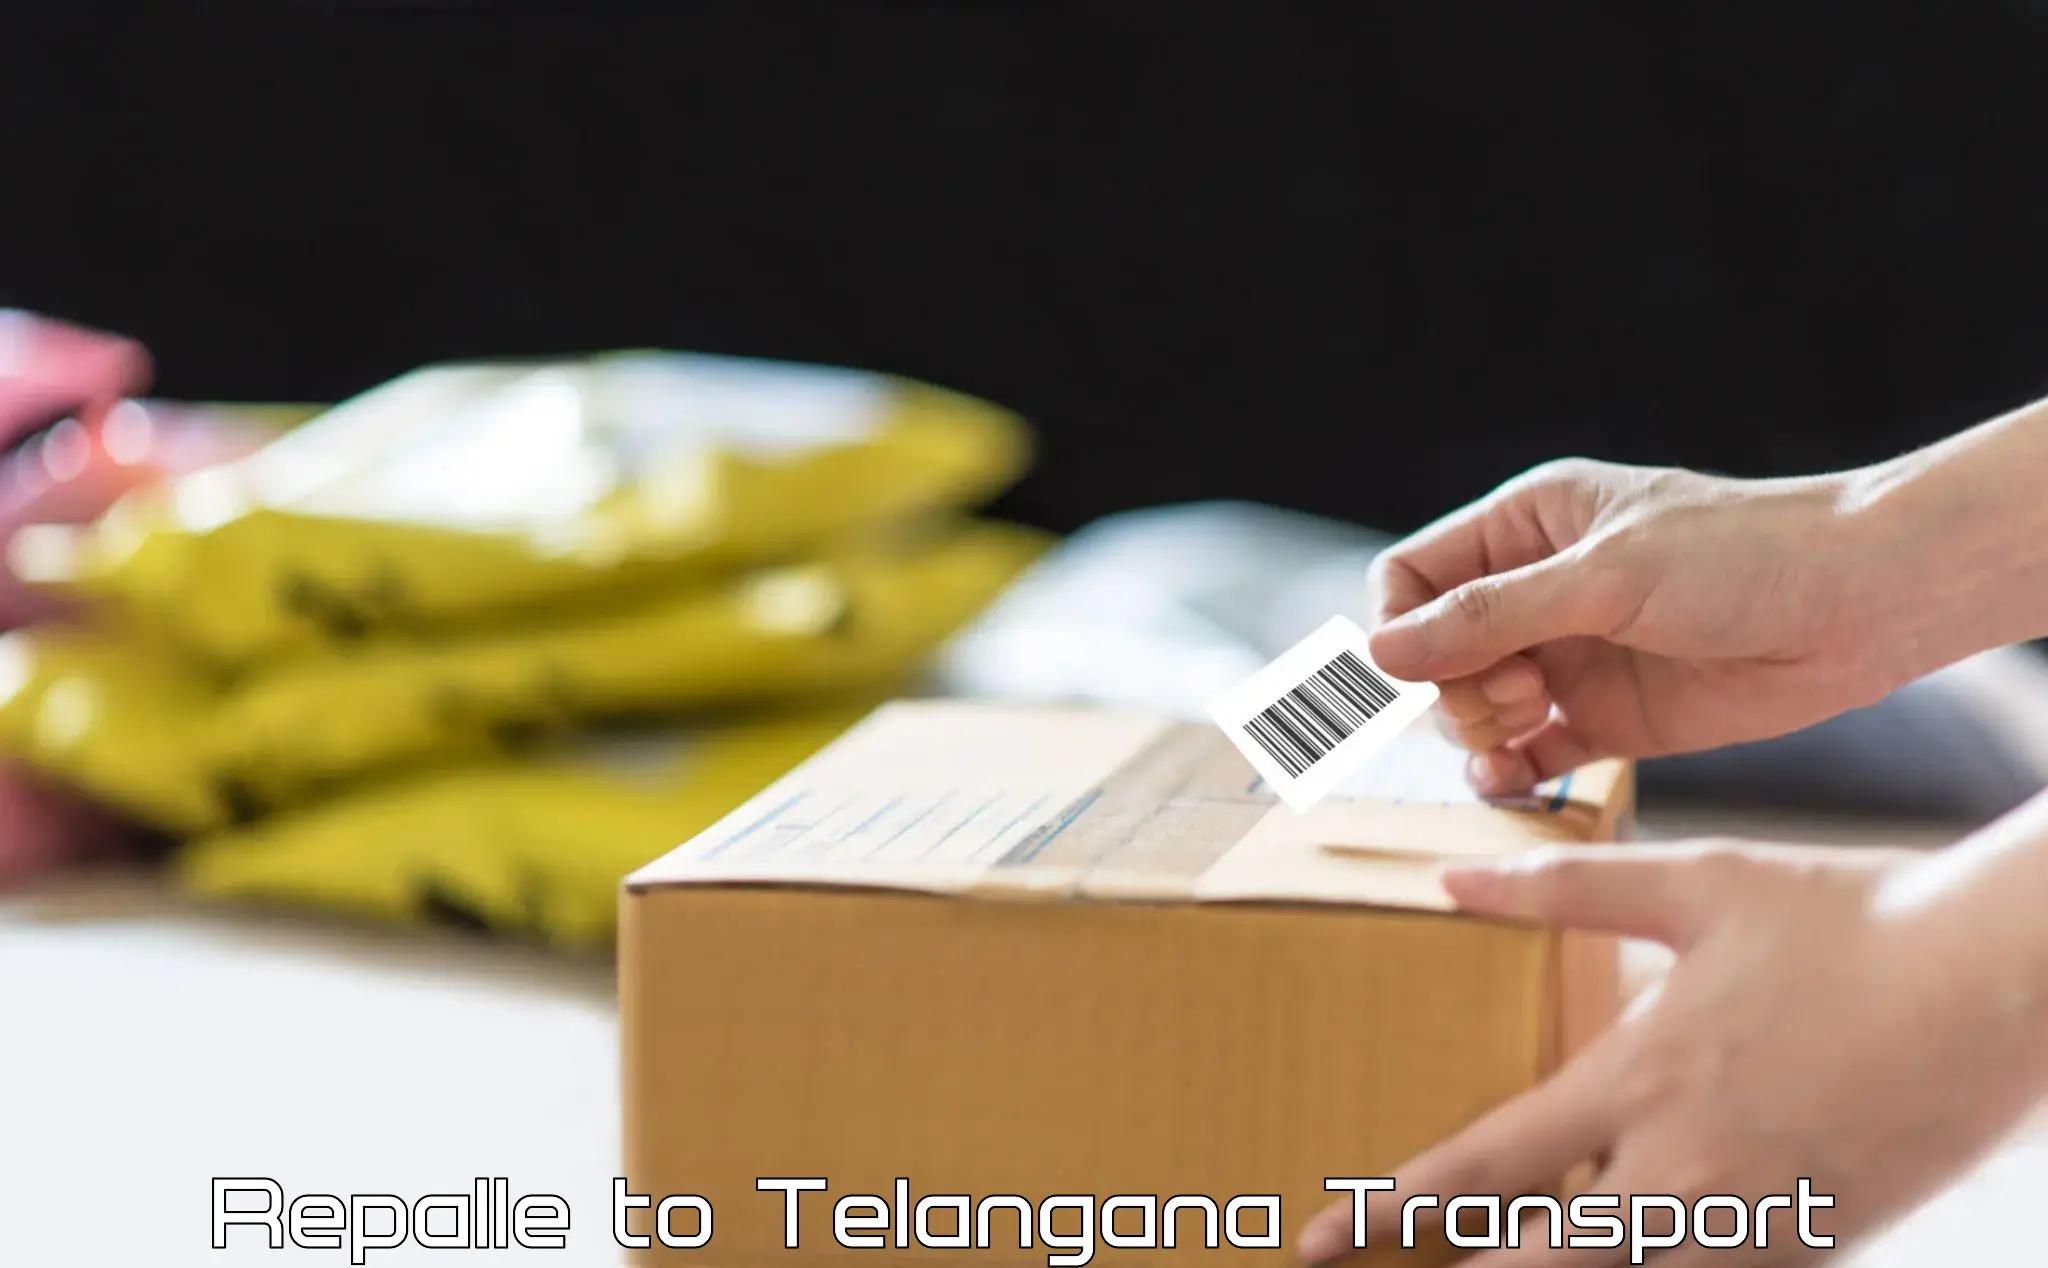 Transport bike from one state to another Repalle to Vemulawada